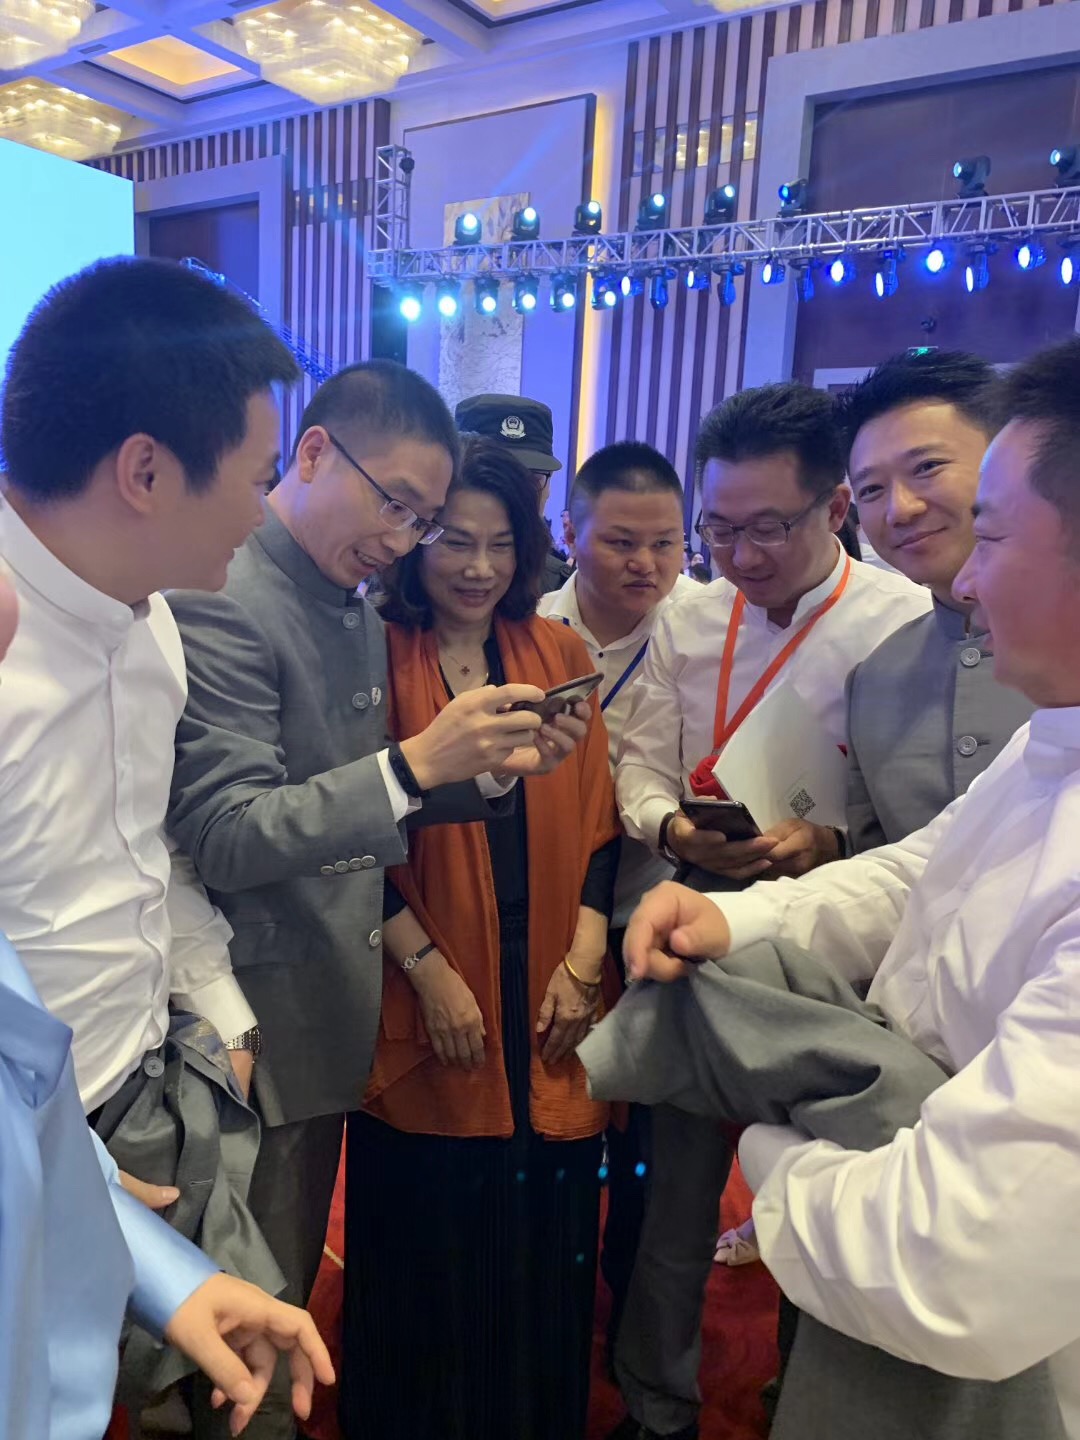 Jinhua Electronics was invited to participate in the 2019 Digital commerce conference & 7th Jiangsu 